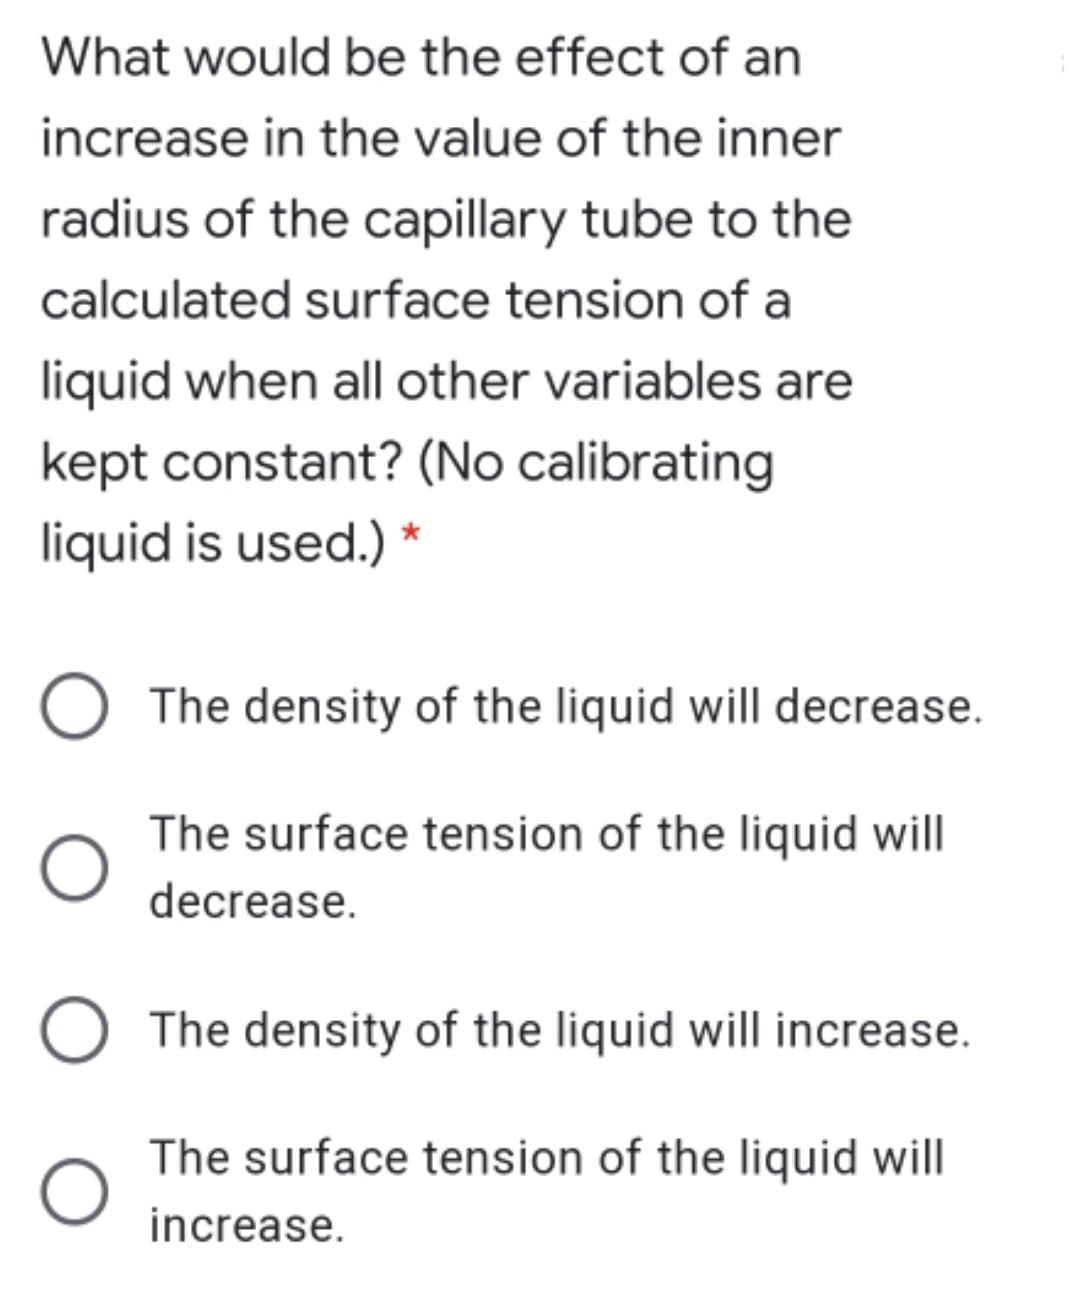 What would be the effect of an
increase in the value of the inner
radius of the capillary tube to the
calculated surface tension of a
liquid when all other variables are
kept constant? (No calibrating
liquid is used.) *
The density of the liquid will decrease.
The surface tension of the liquid will
decrease.
The density of the liquid will increase.
The surface tension of the liquid will
increase.
